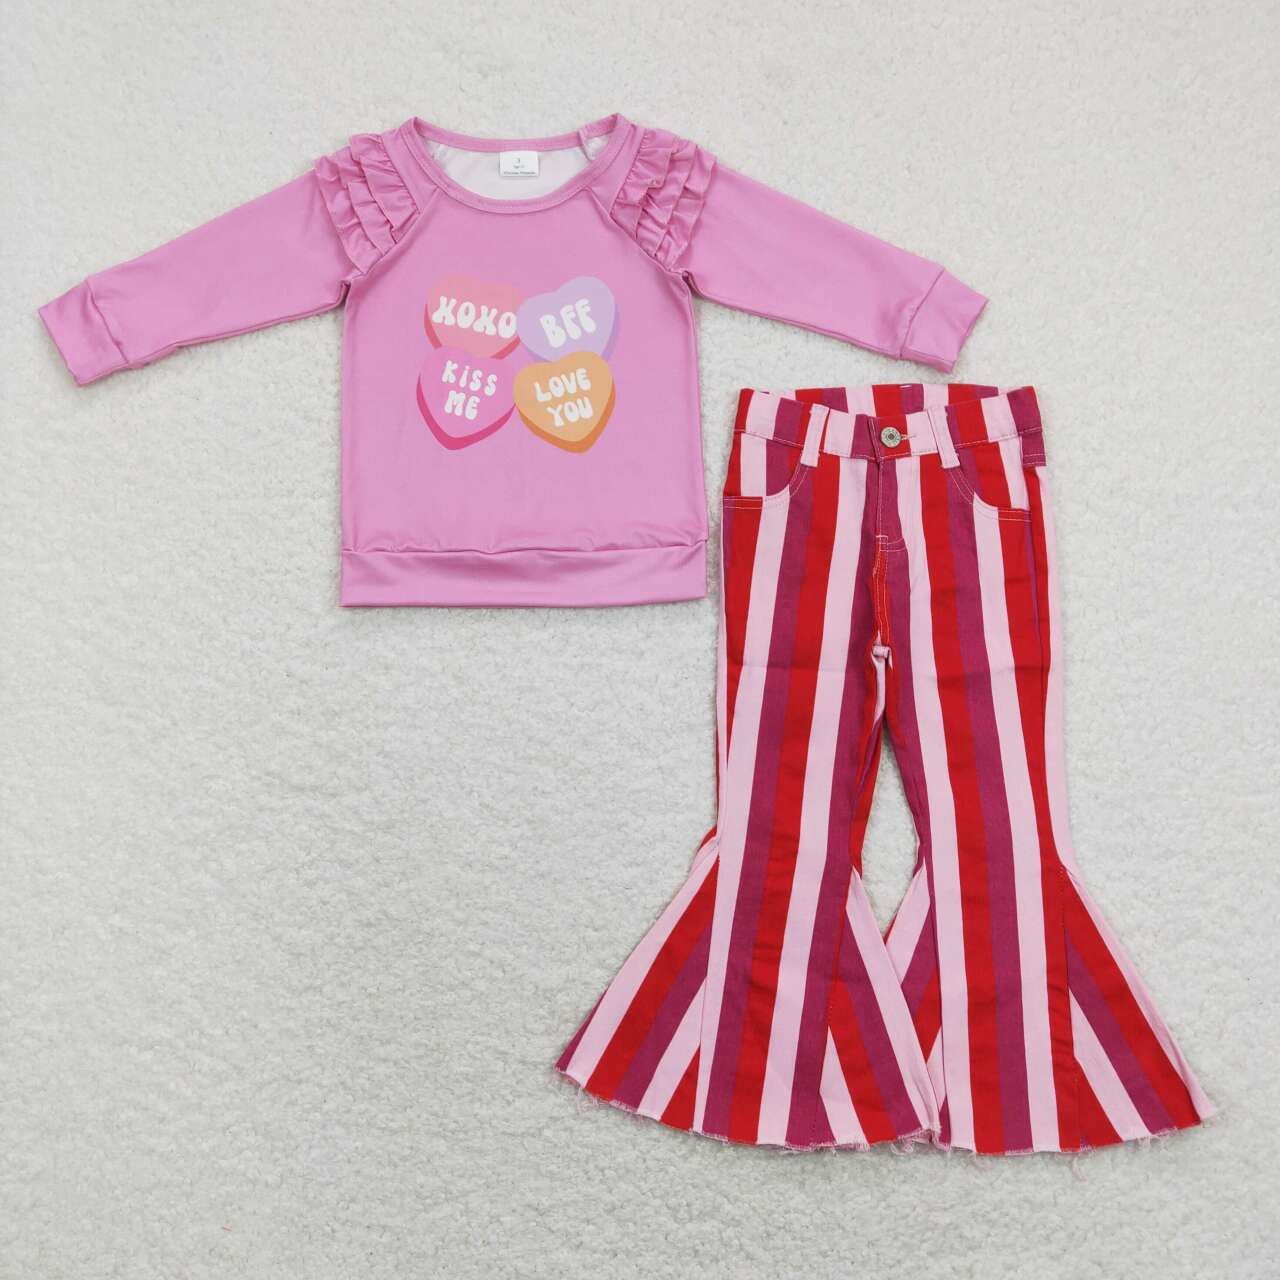 xoxo valentines day shirt red pink stripes jeans bell bottoms spring fall outfit